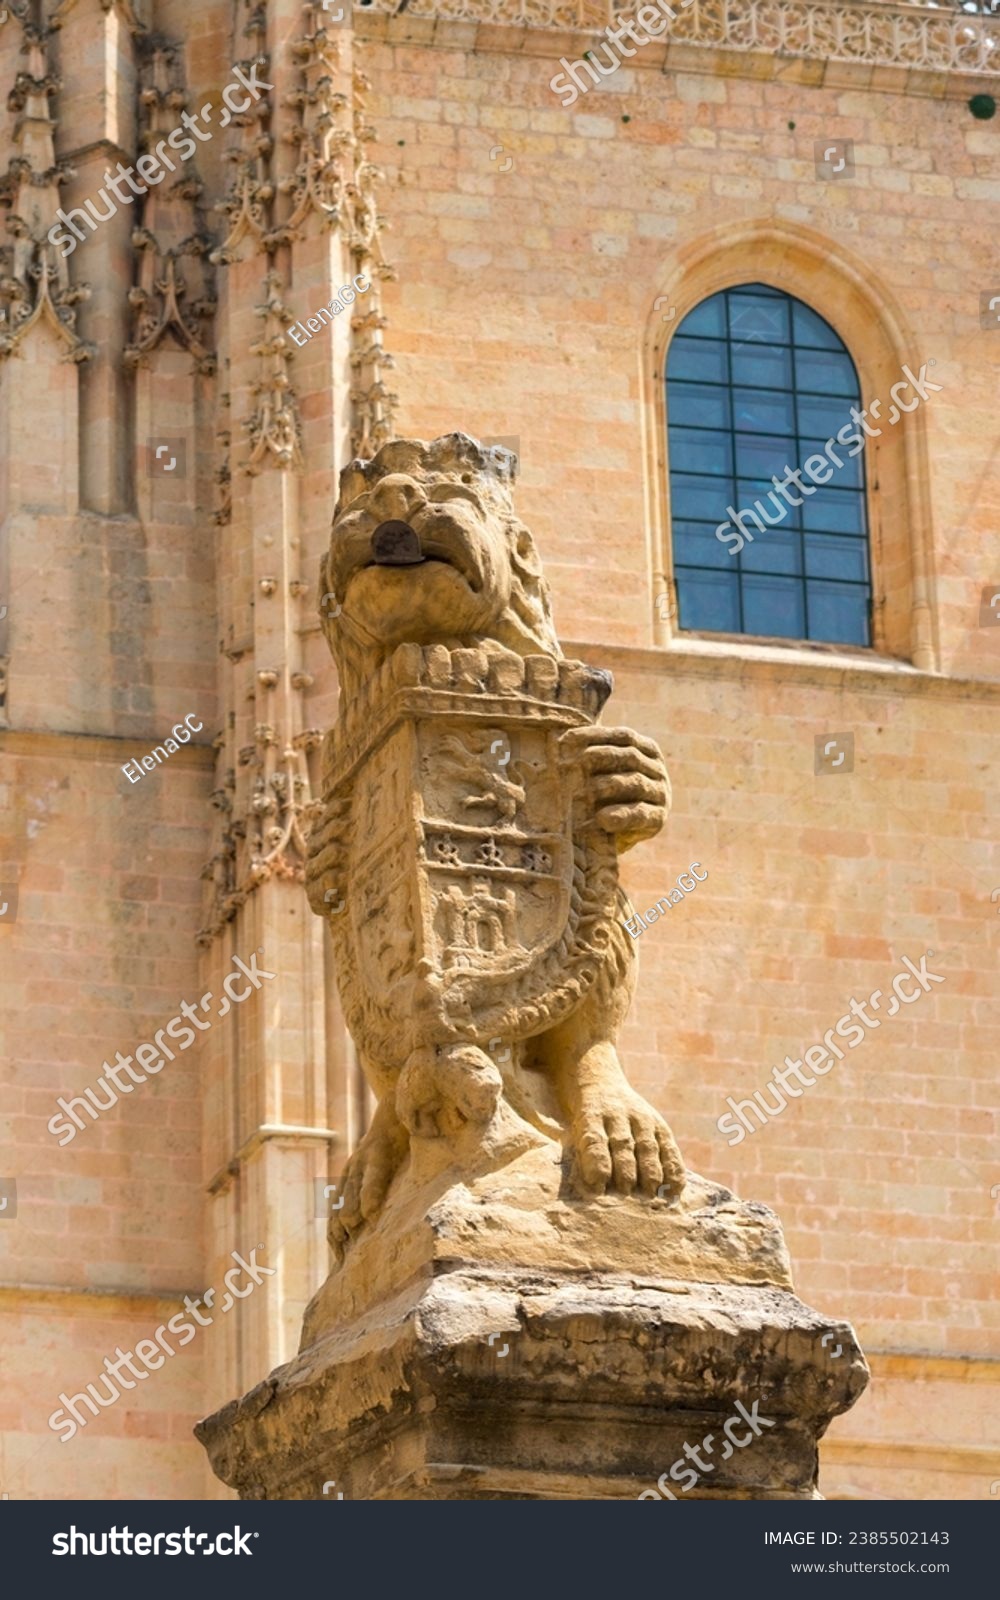  Lion with coat of arms of Castile and Leon in front of the Segovia Cathedral. #2385502143